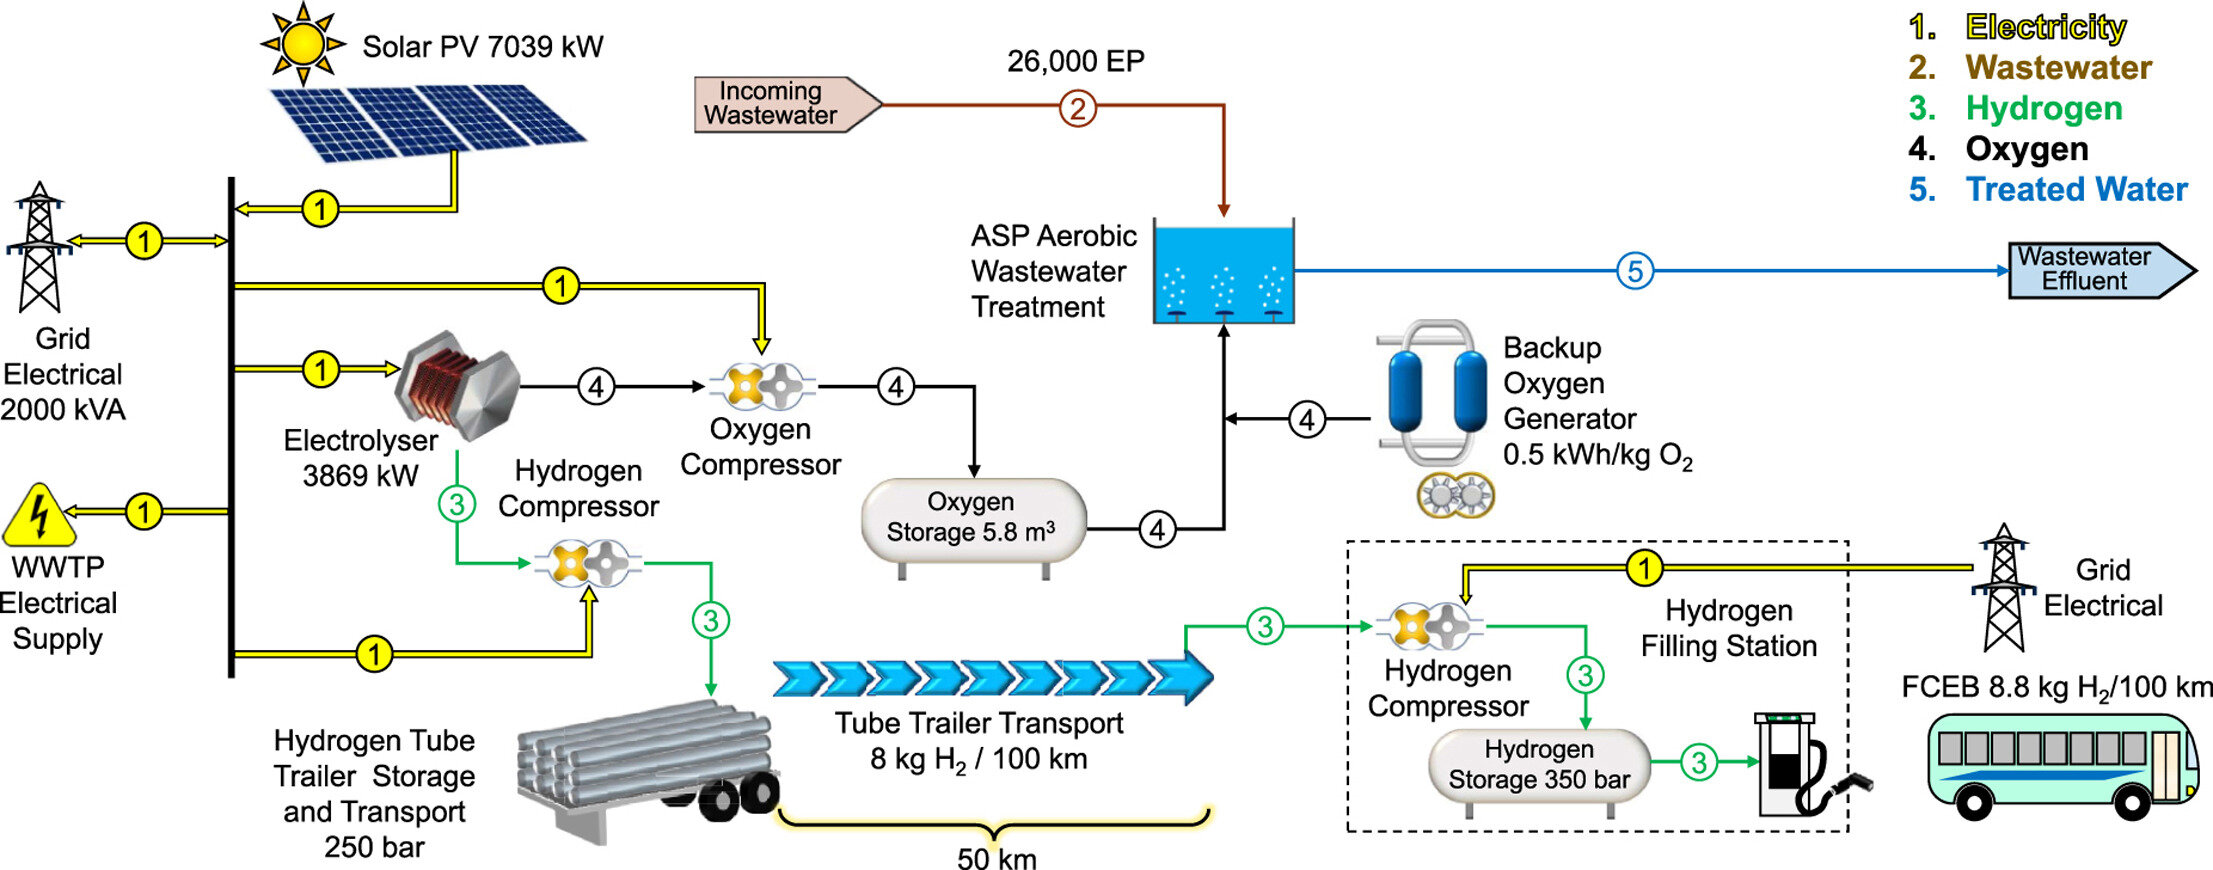 Integrated wastewater treatment plants and public transport are a win-win, says simulation study